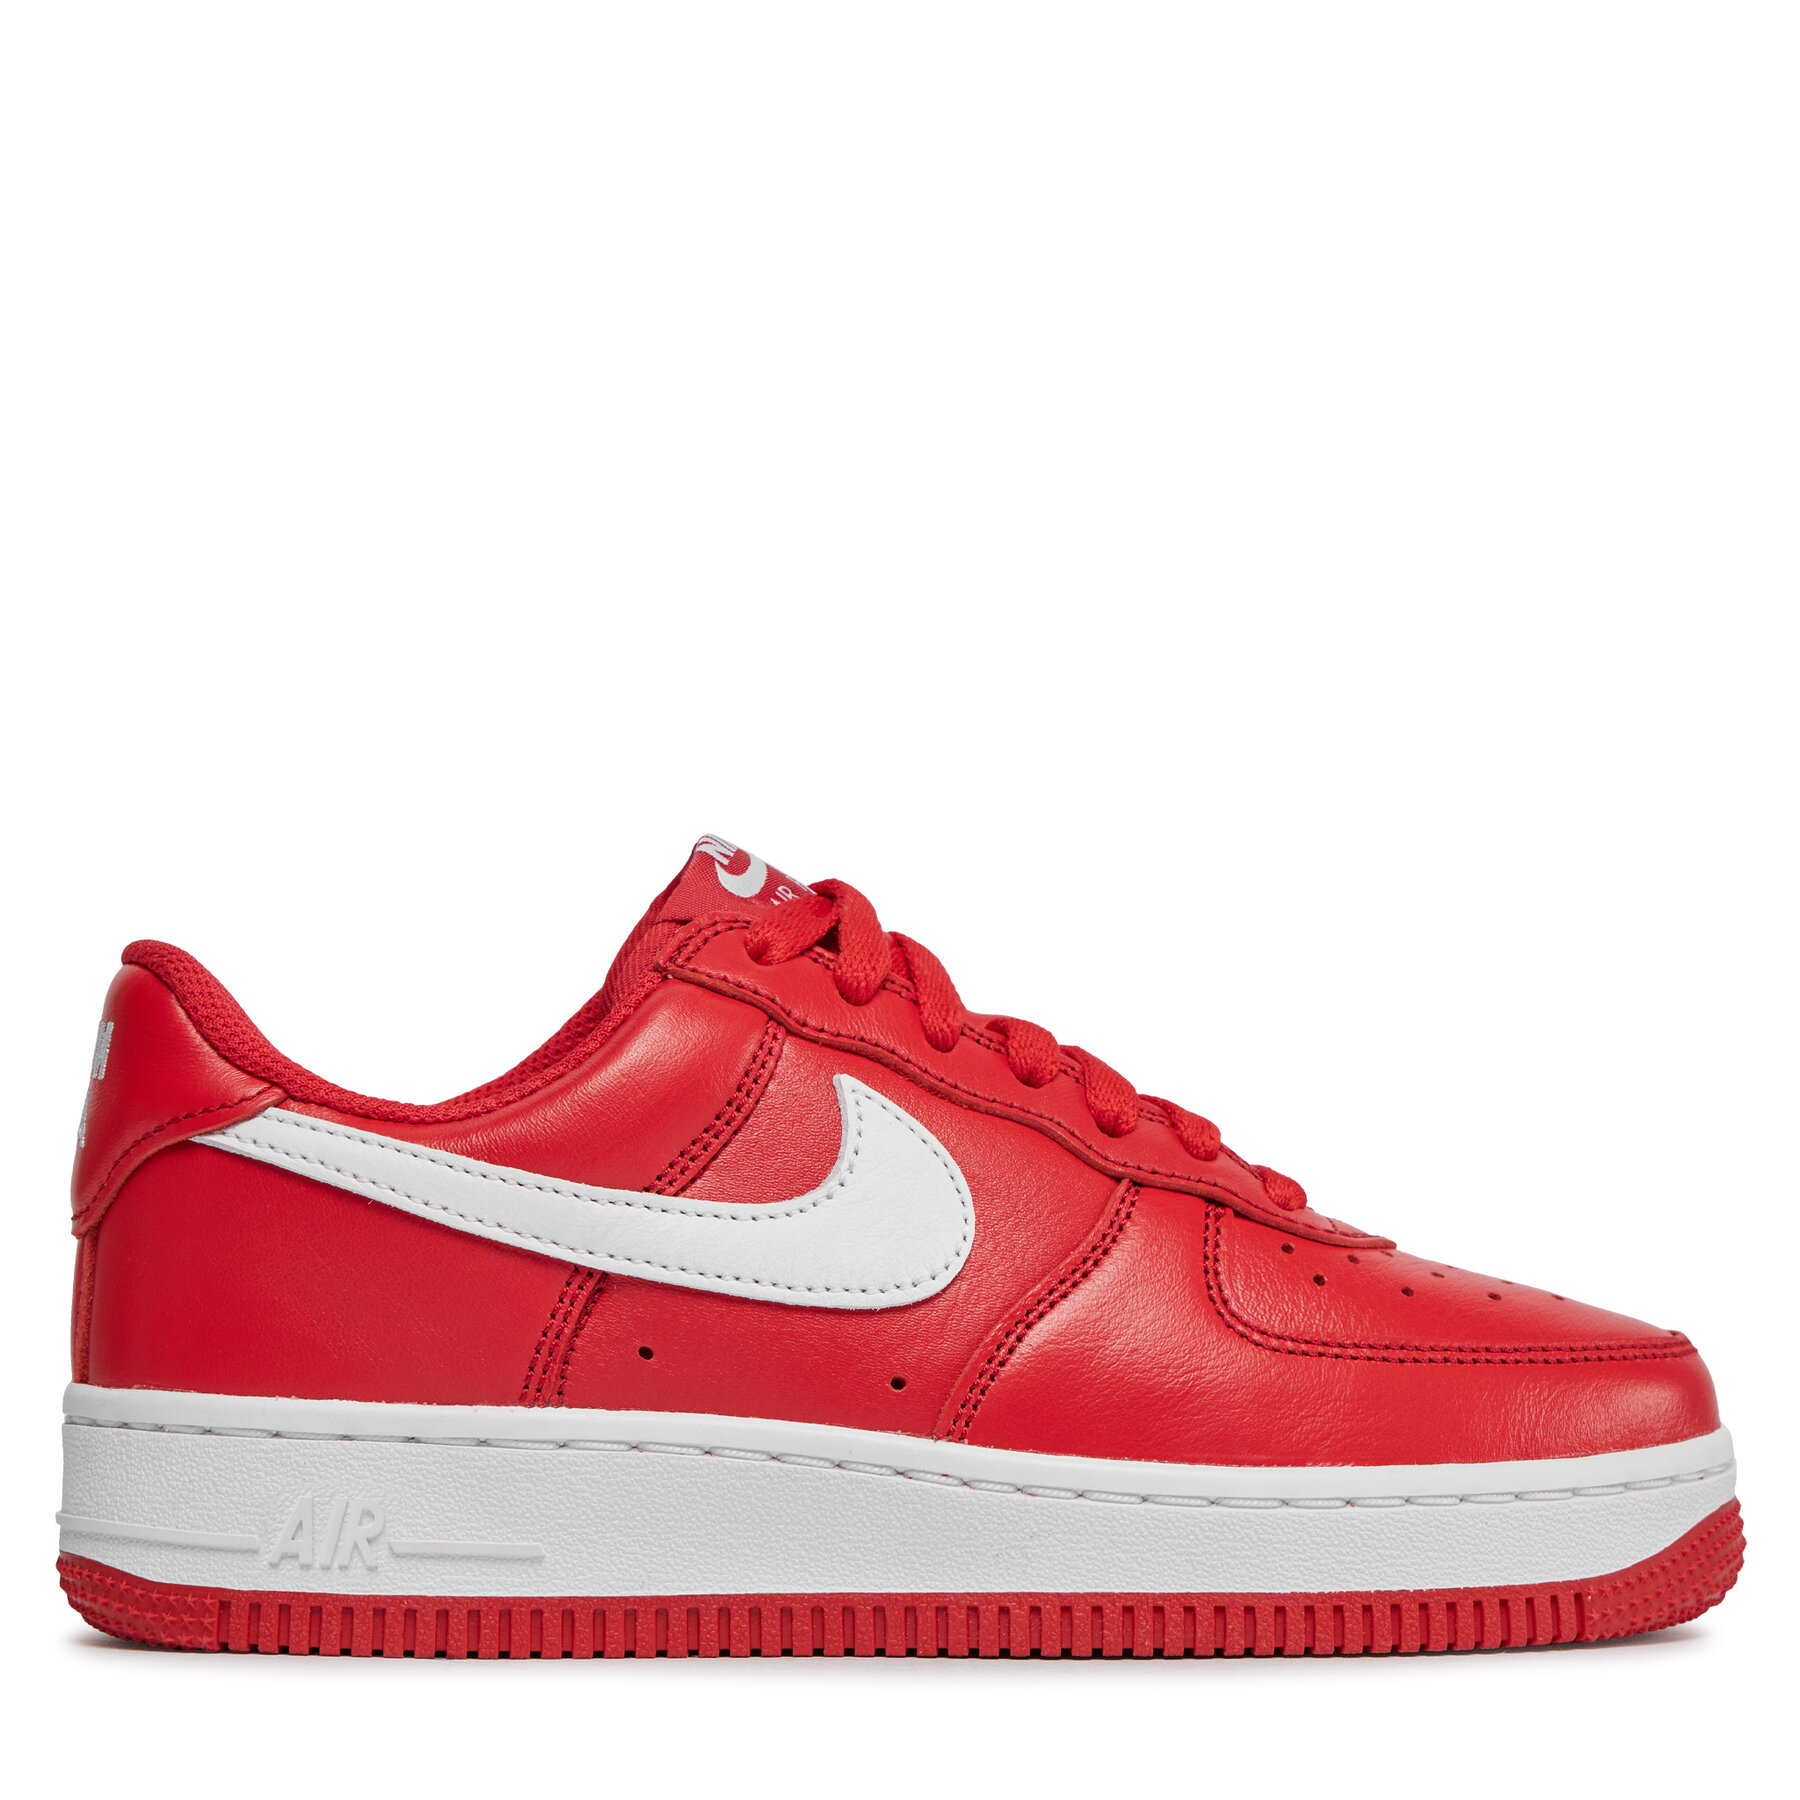 Nike Air Force 1 Low Retro red